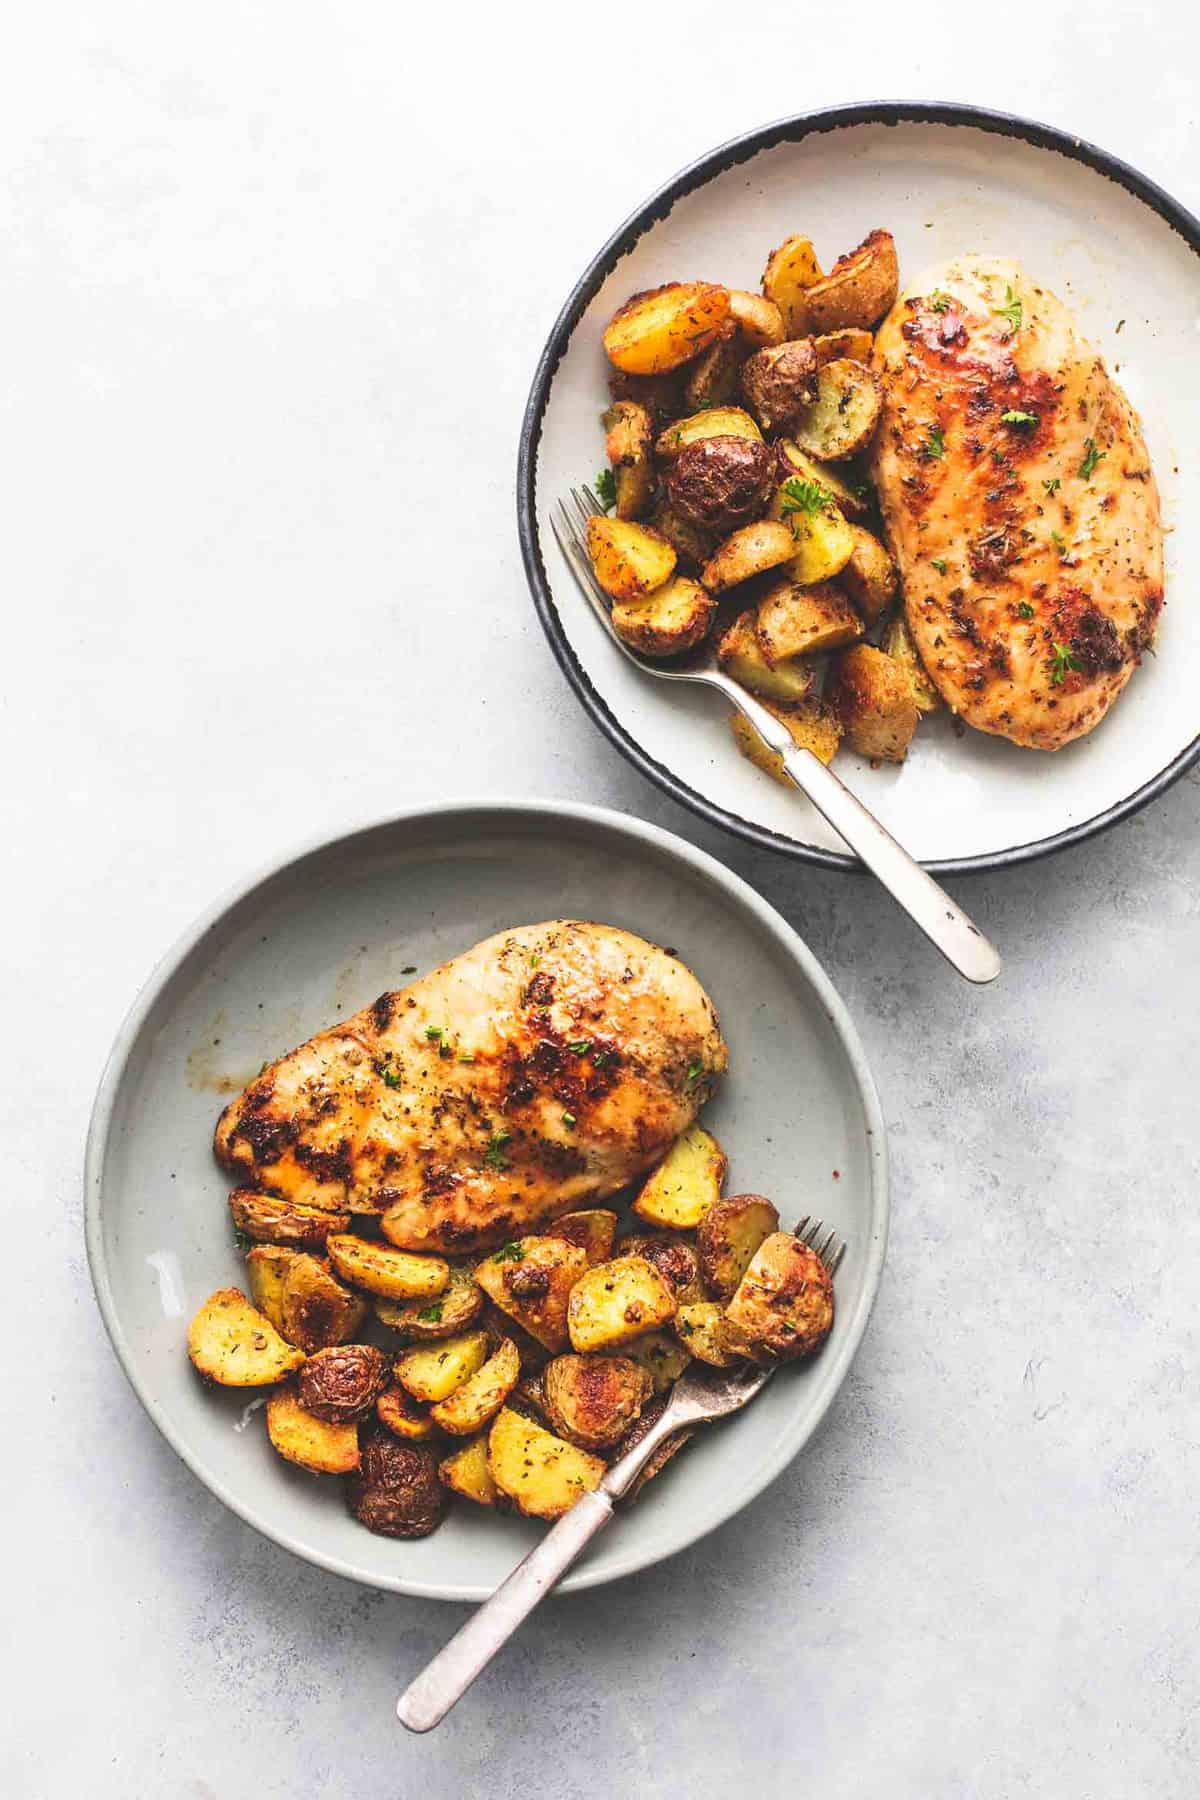 top view of two plates with sheet pan chicken and potatoes and forks on them.